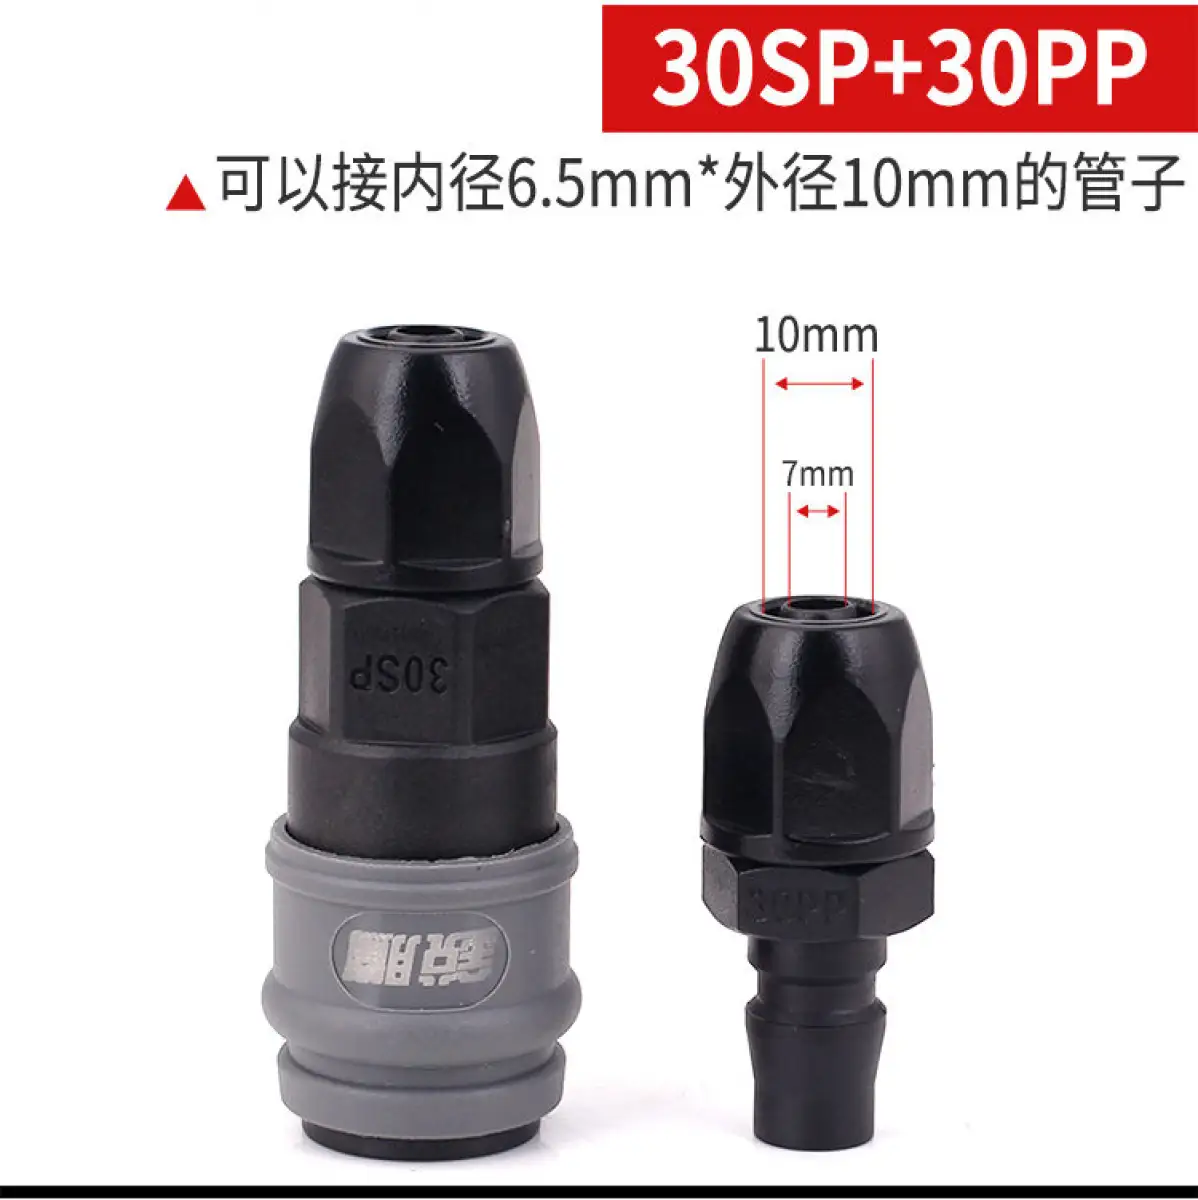 Quick Plug Head Self-locking Connector for Air Pipe Air Pump Hose Connector Accessories Size : 30PP 